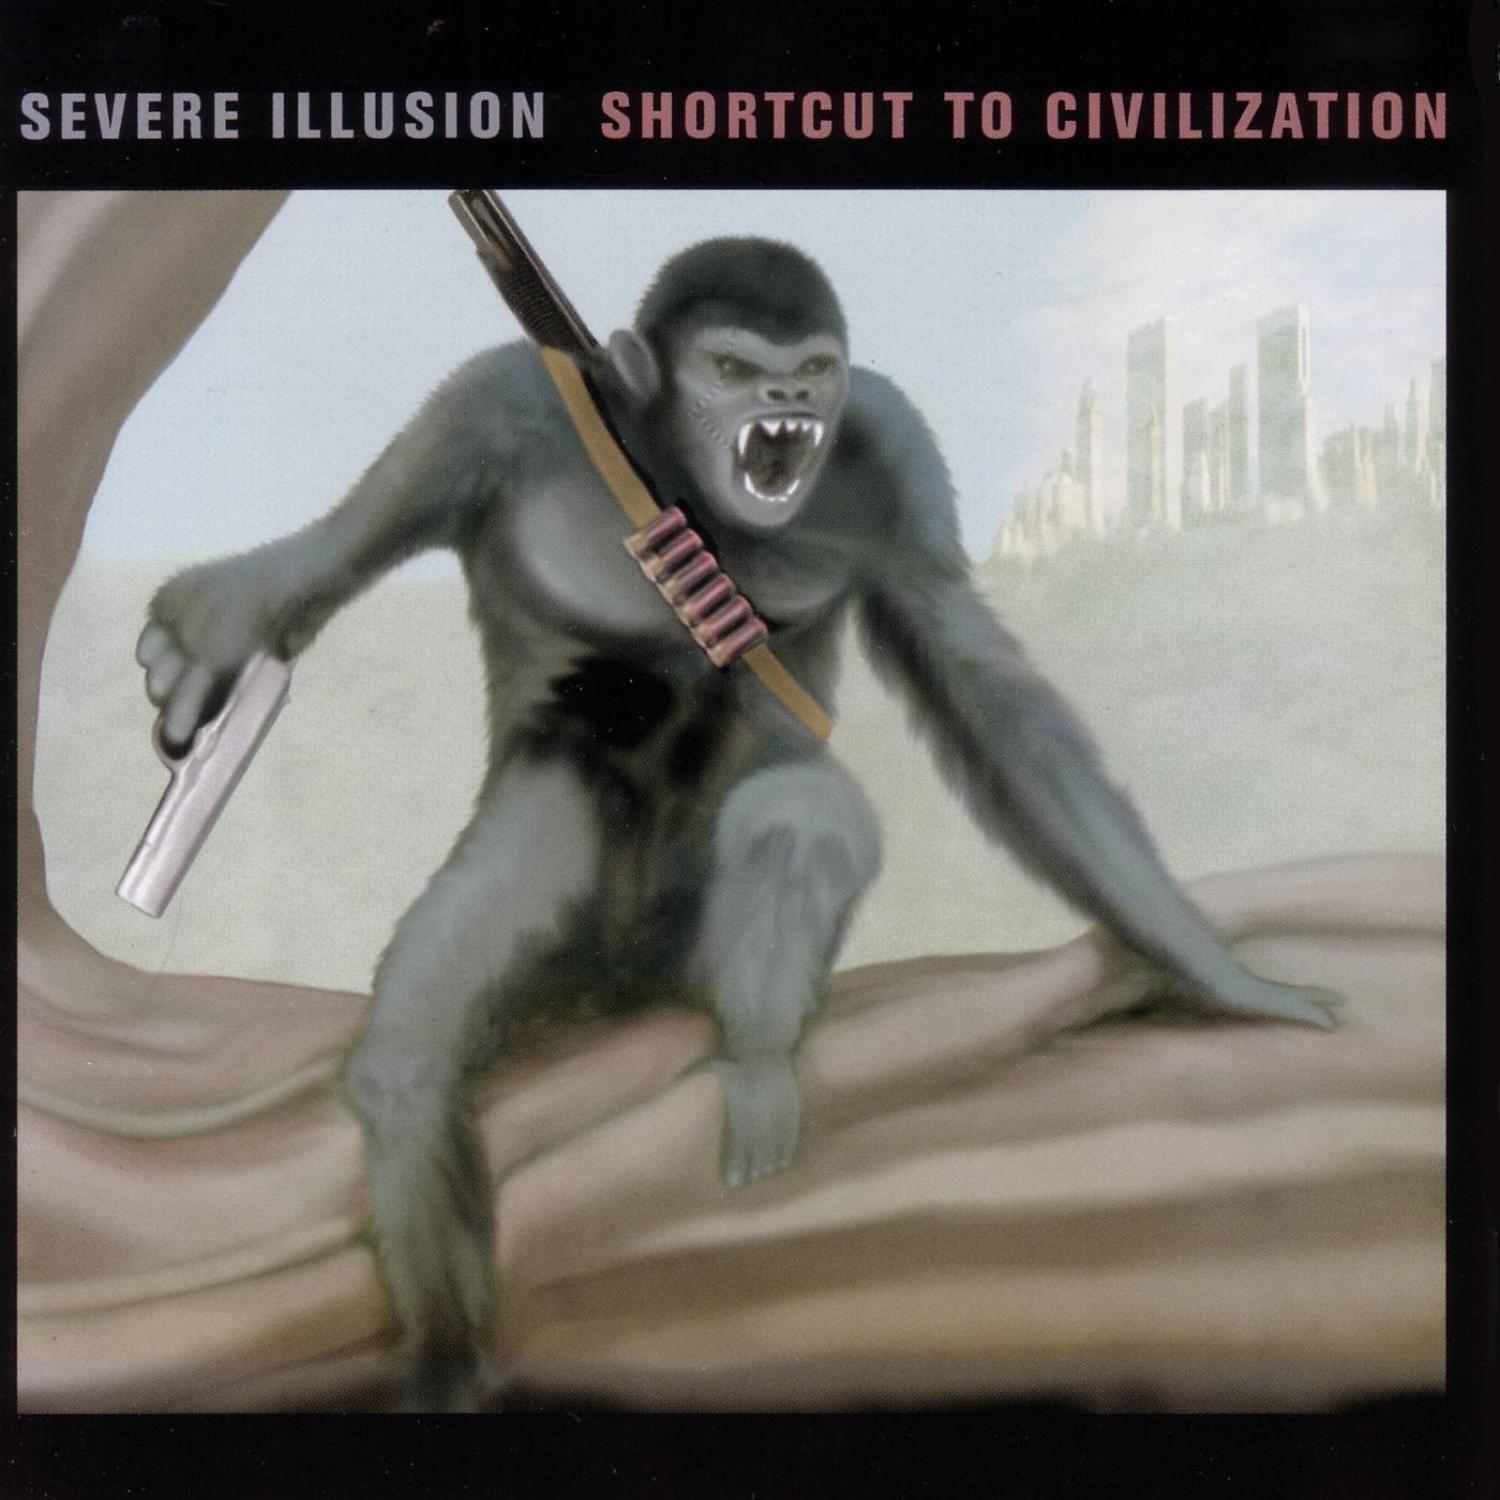 Severe Illusion - Named after you